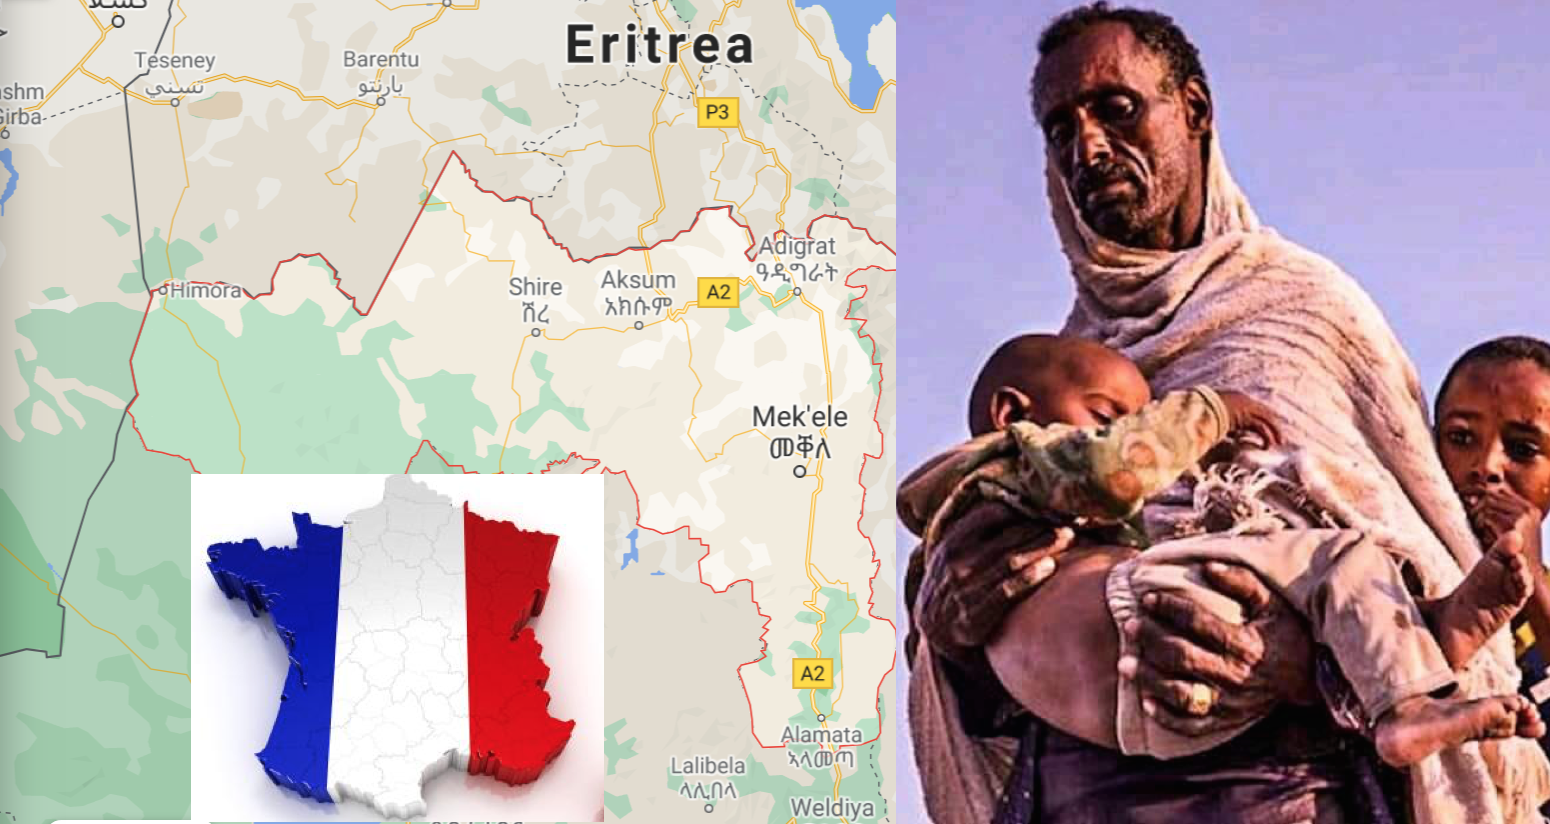 On the war on Tigray, France is divided between business and defence of human rights